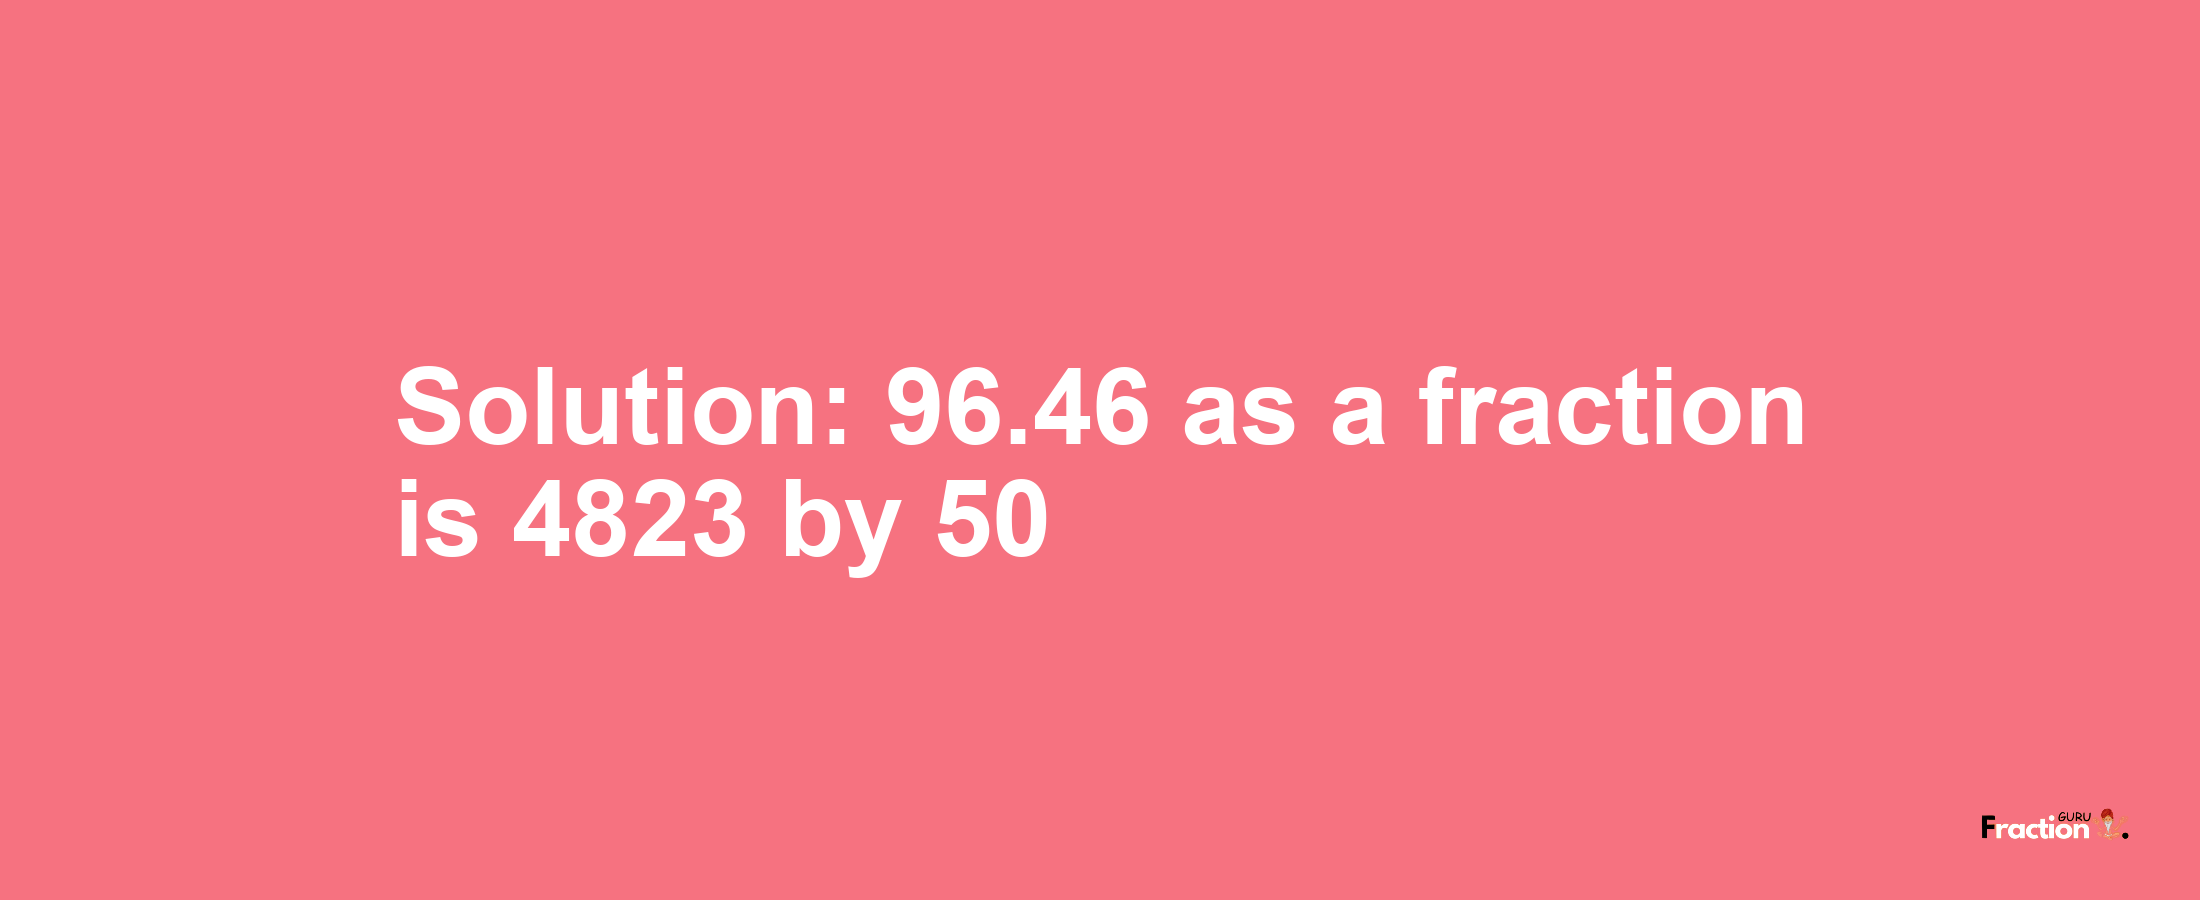 Solution:96.46 as a fraction is 4823/50